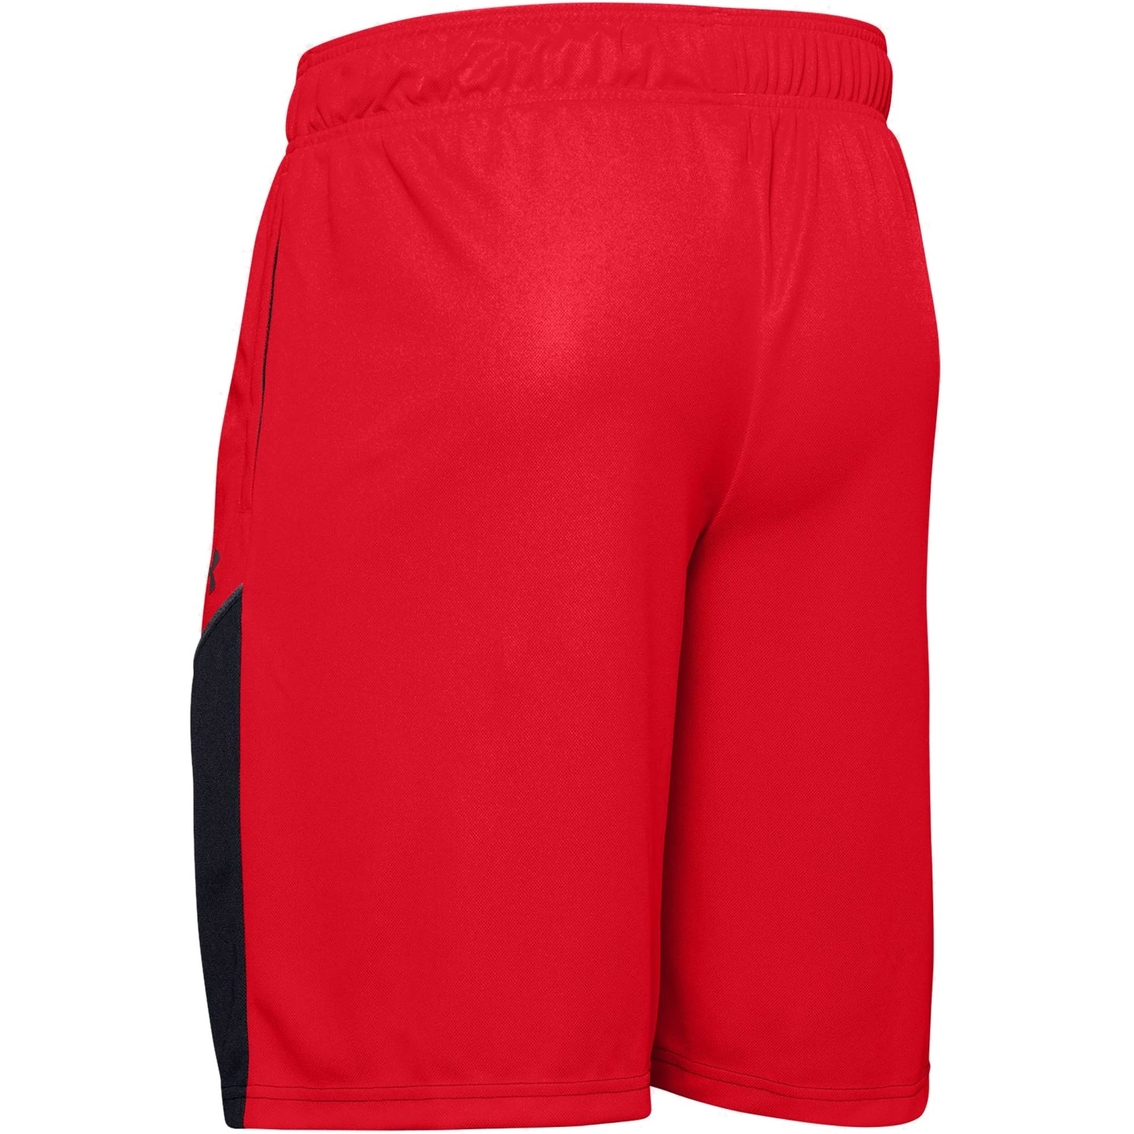 Under Armour Baseline 10 in. Shorts - Image 6 of 6